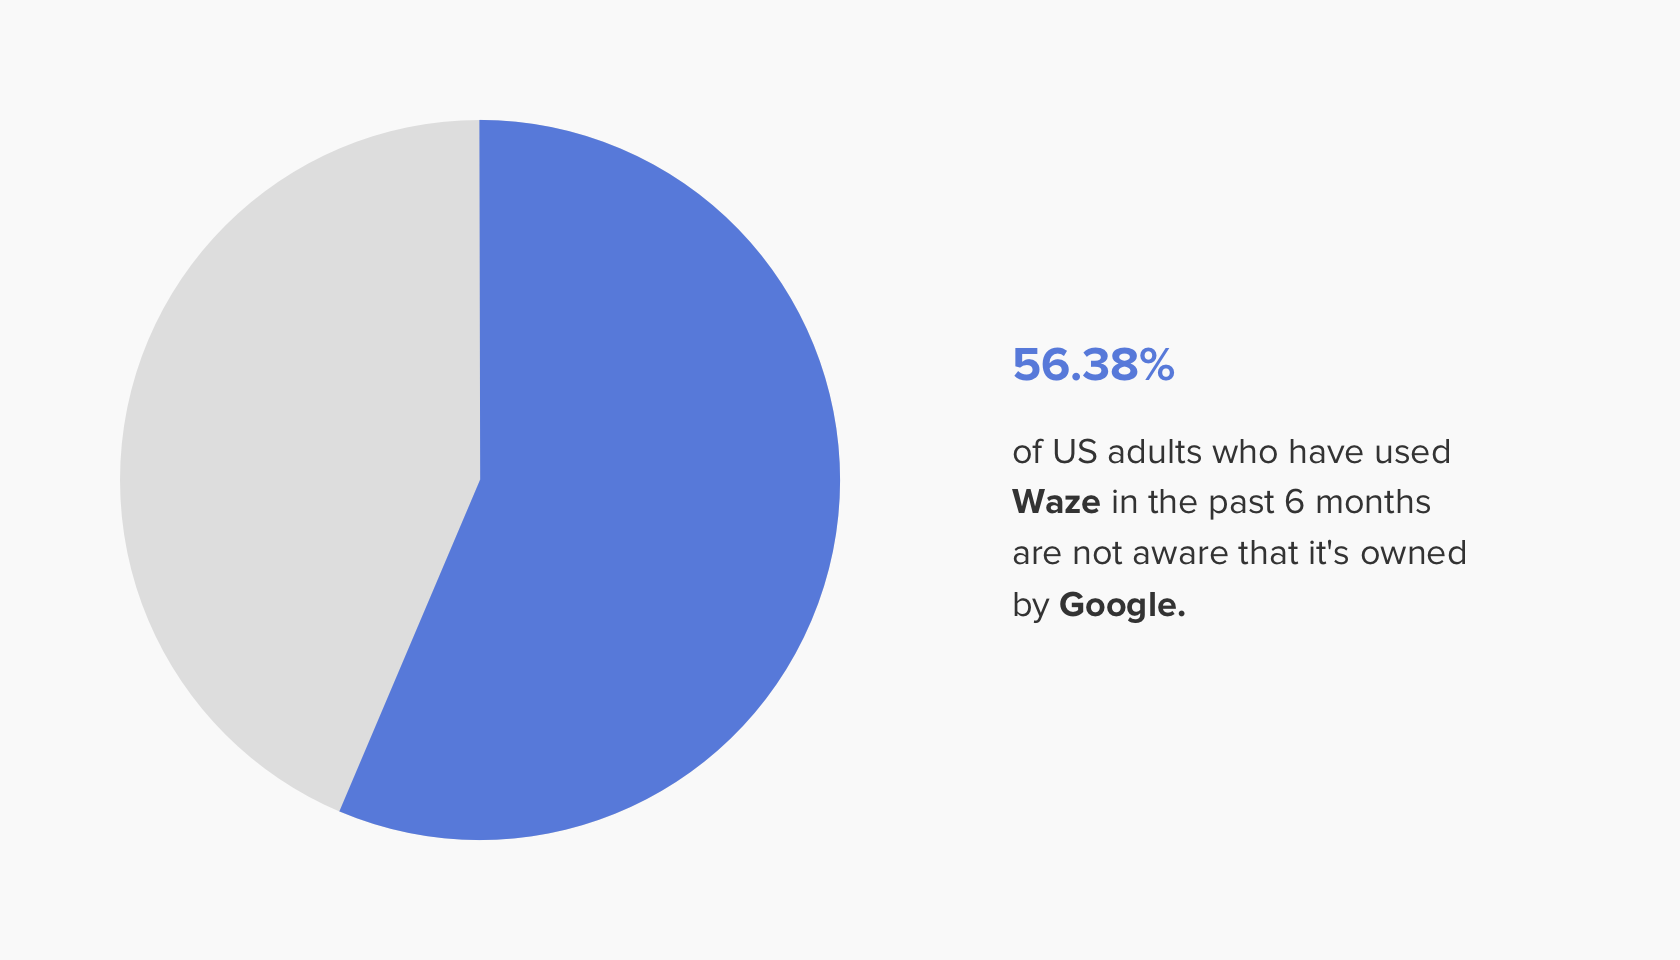 pie-chart-showing-percentge-of-people-unaware-that-Google-owns-Waze